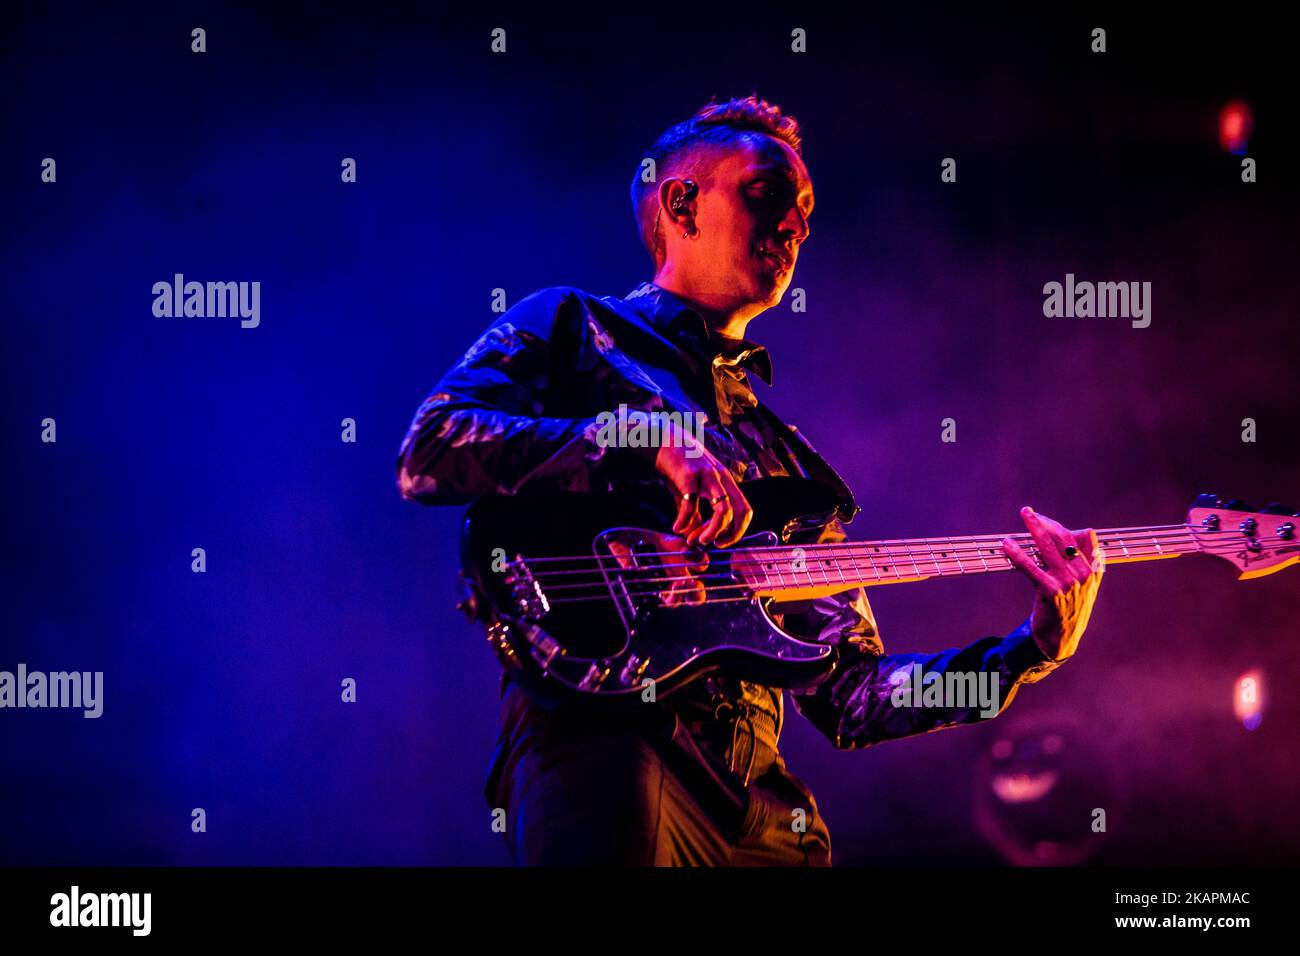 Oliver SIM della band indie inglese The XX Performing live at Lowlands Festival 2017 Biddinghuizen, Netherlands (Photo by Roberto Finizio/NurPhoto) Foto Stock